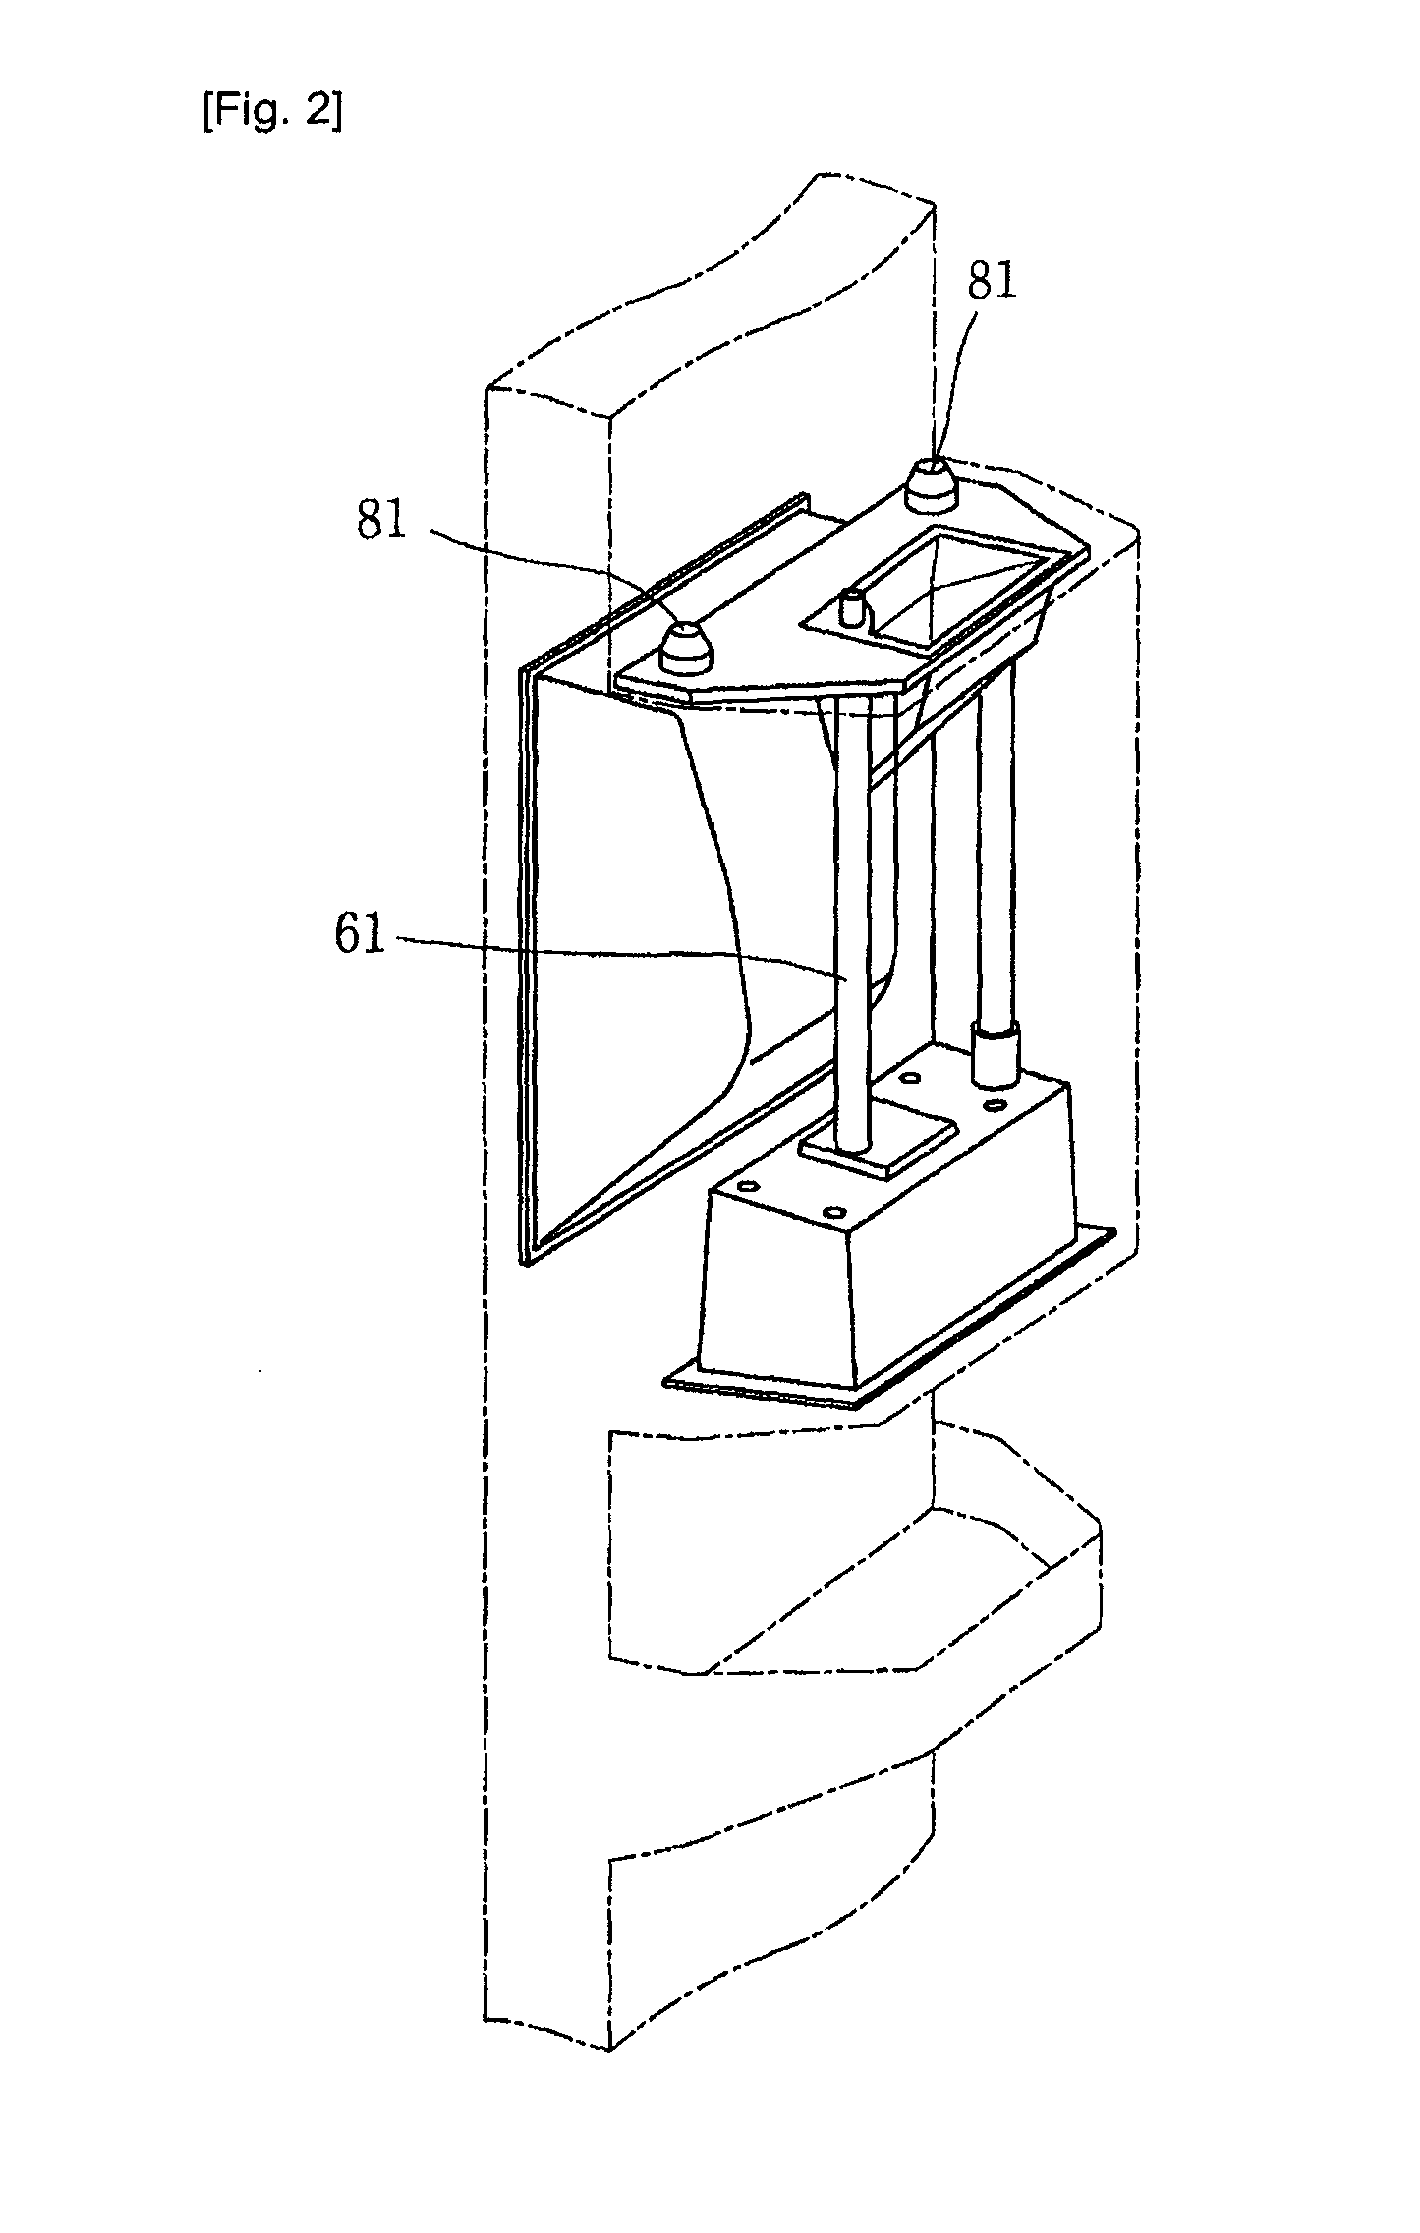 Ice making system